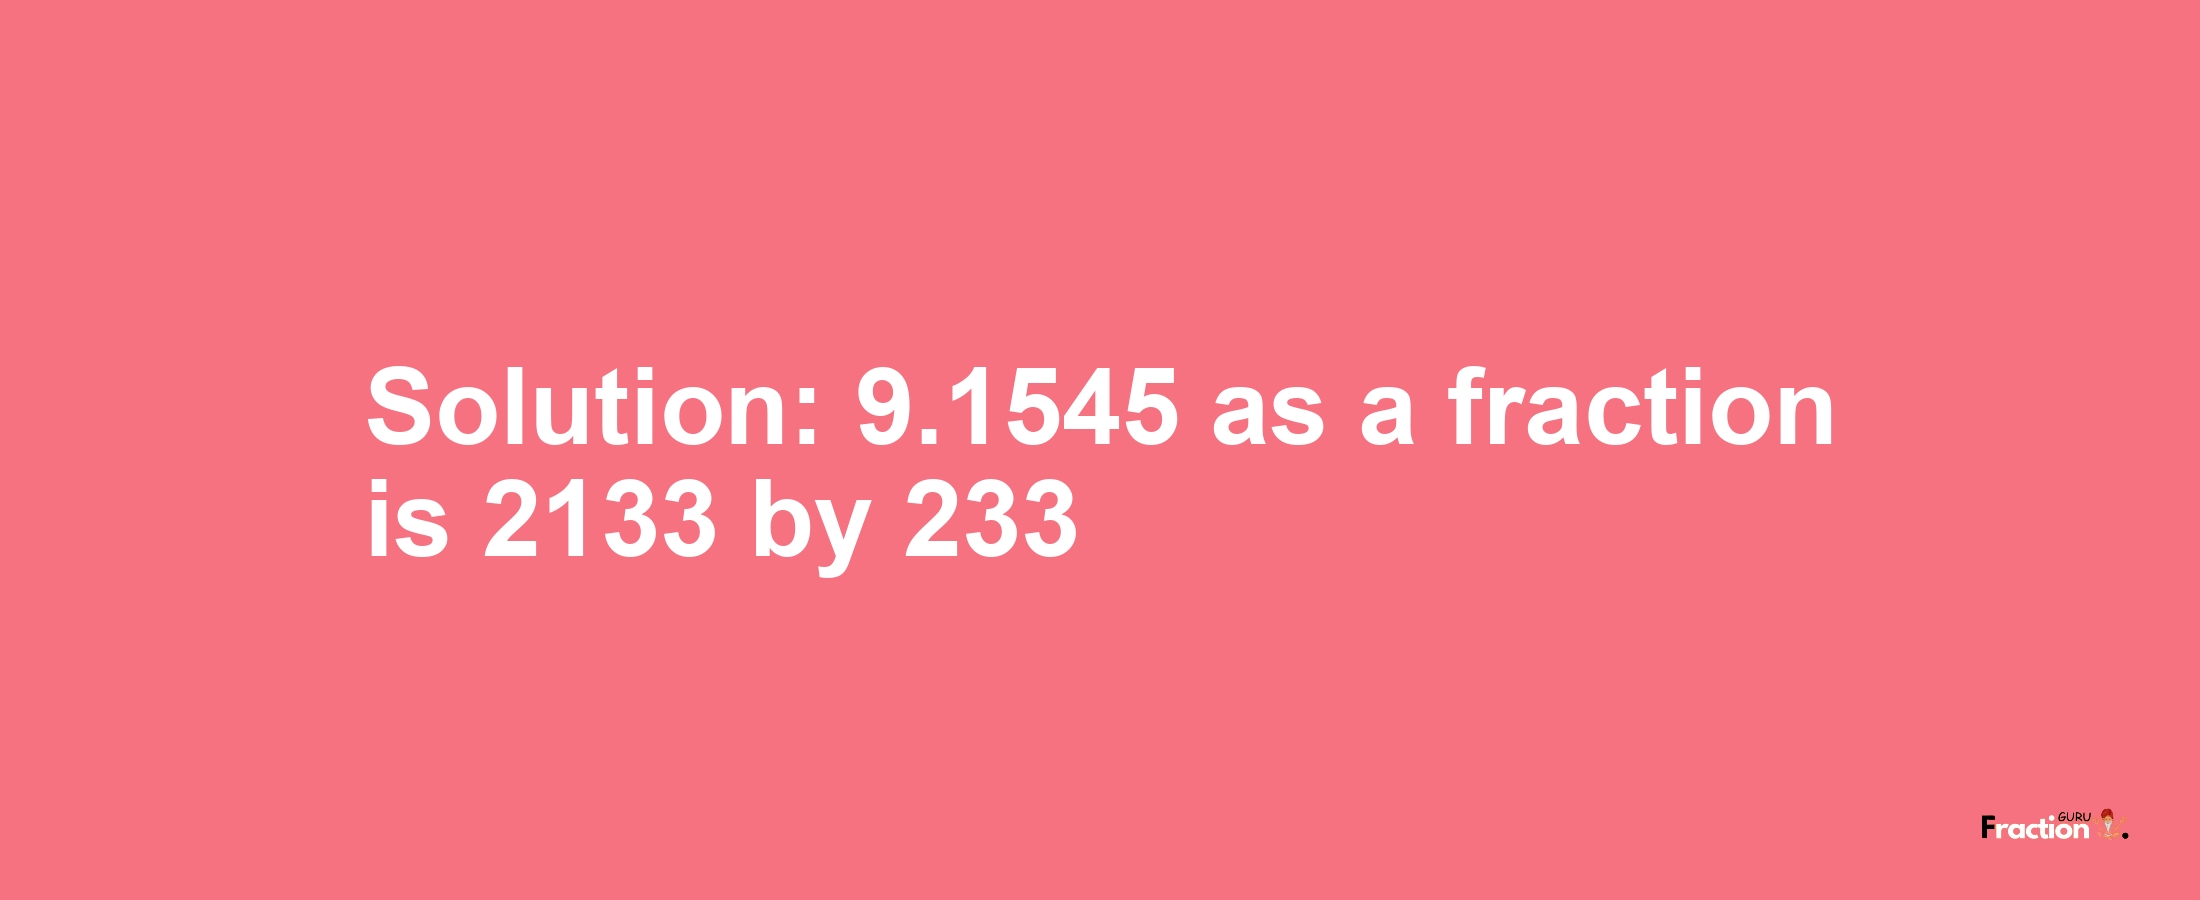 Solution:9.1545 as a fraction is 2133/233